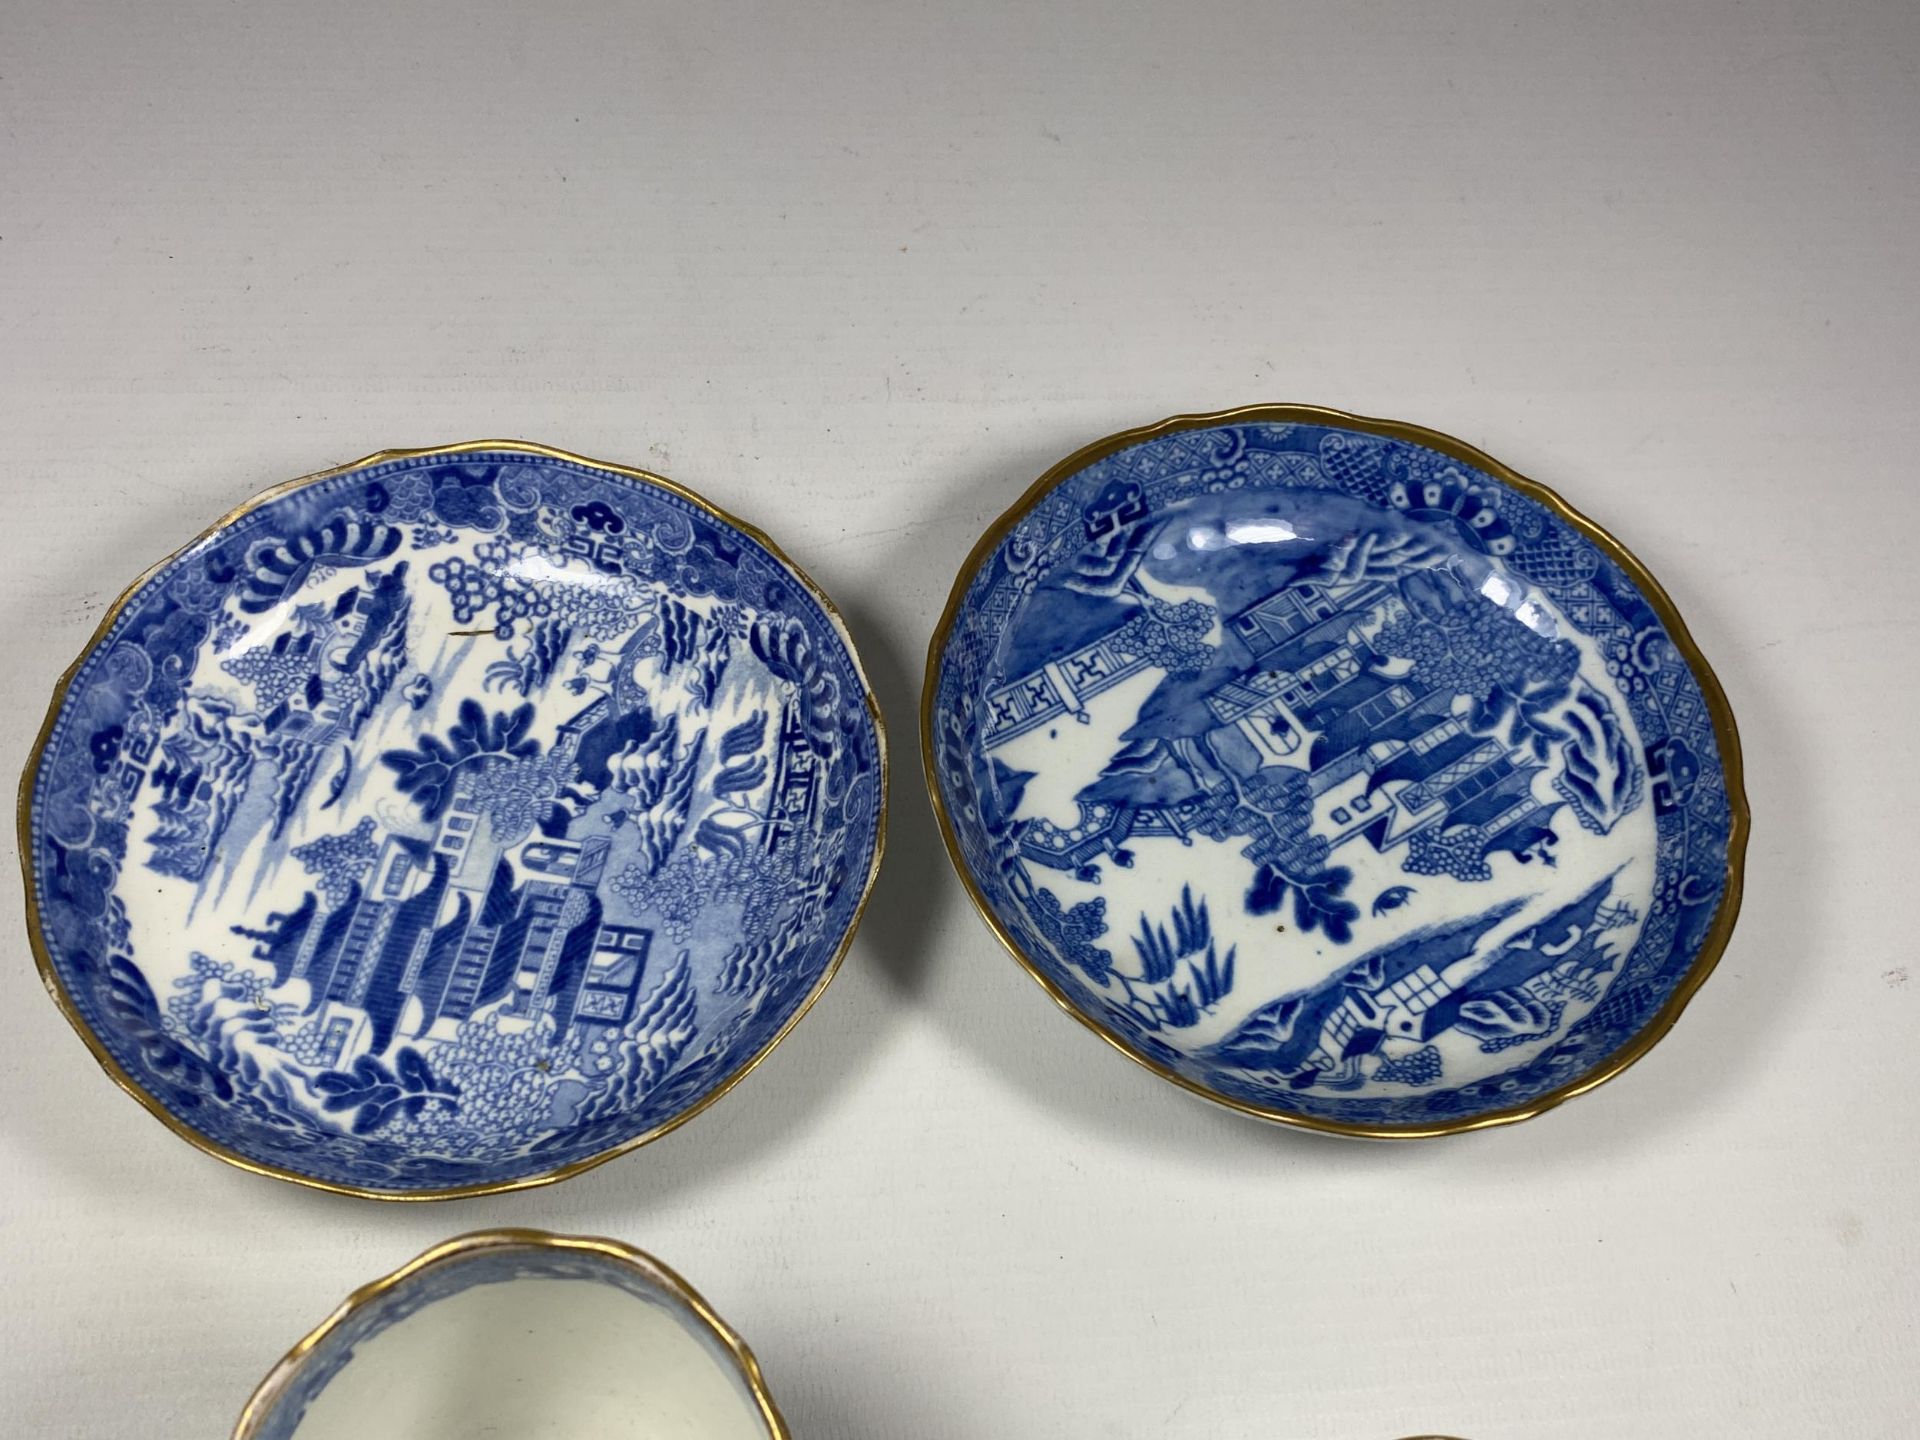 TWO CHINESE QING EXPORT BLUE AND WHITE PORCELAIN CUPS & SAUCERS, CUP HEIGHT 6.5CM - Image 4 of 6